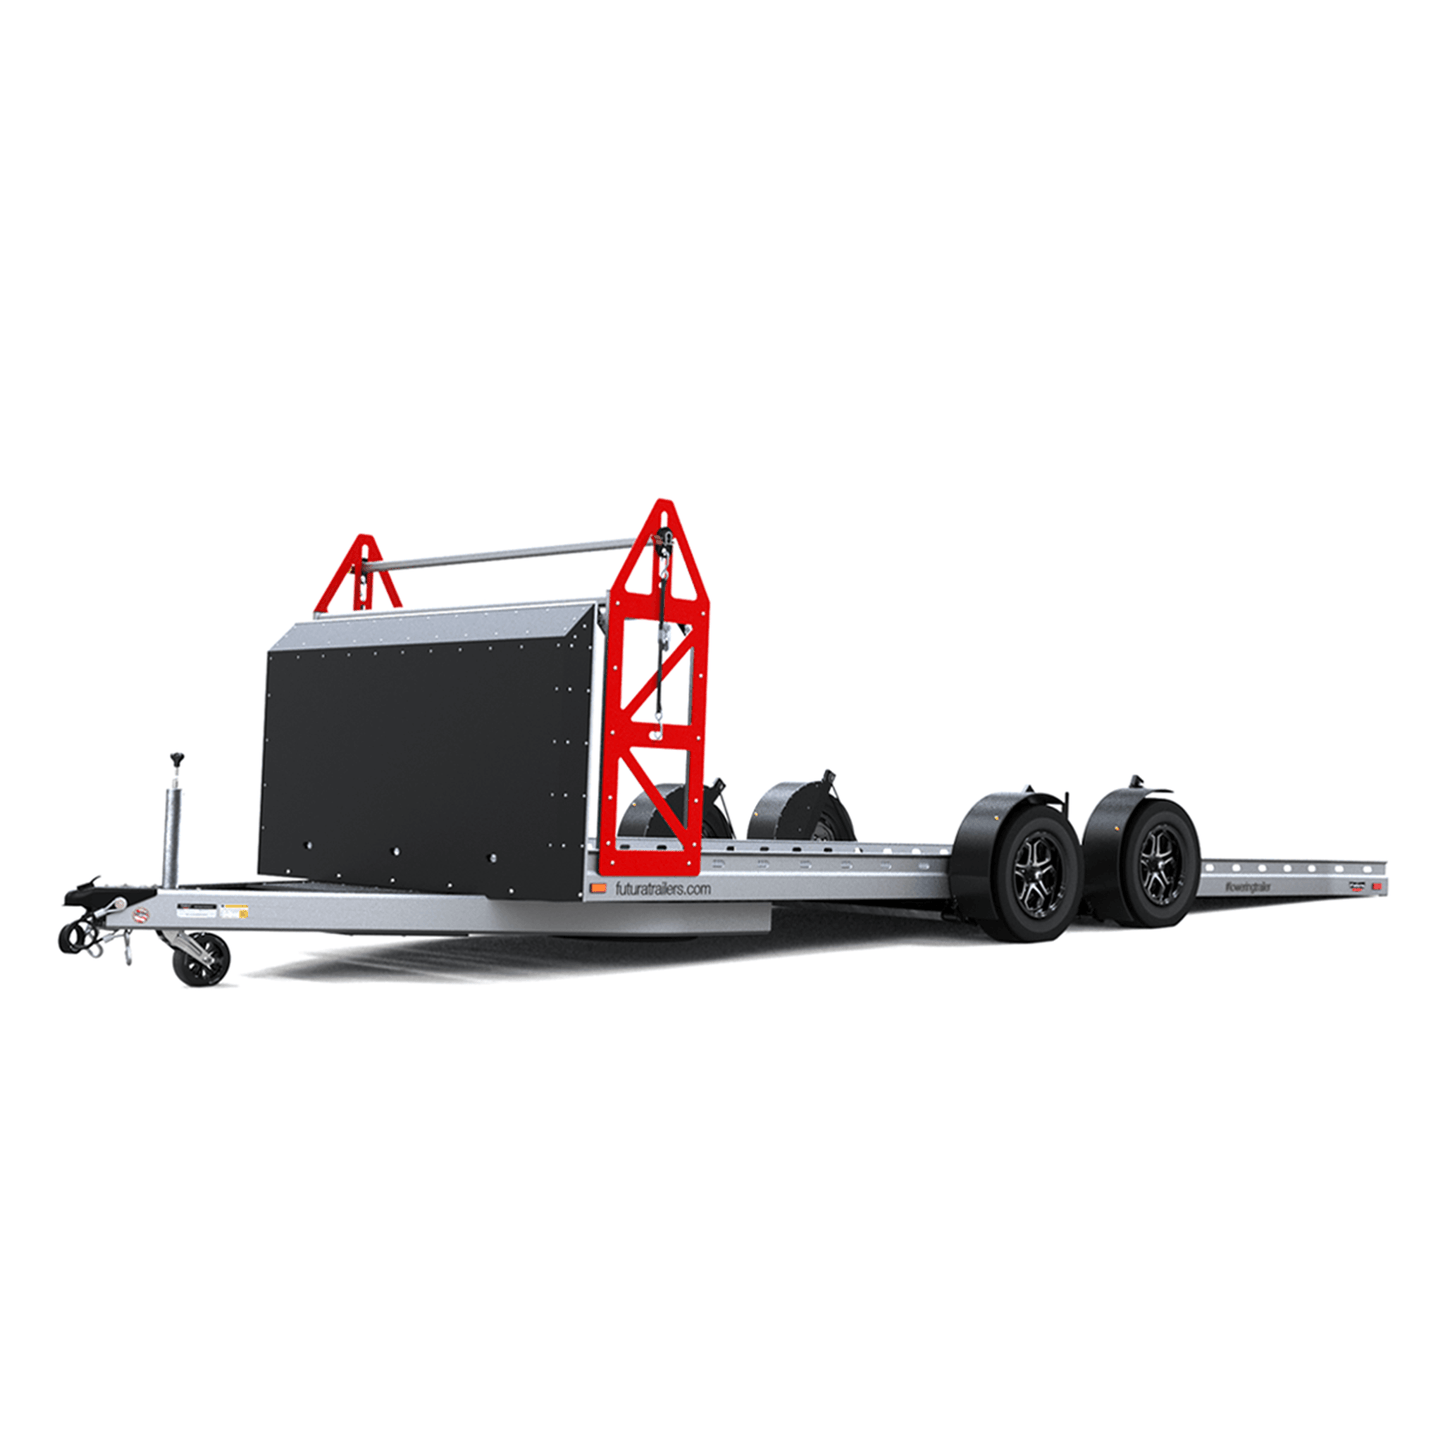 Pro Sport Lowering Trailer from $20,495*